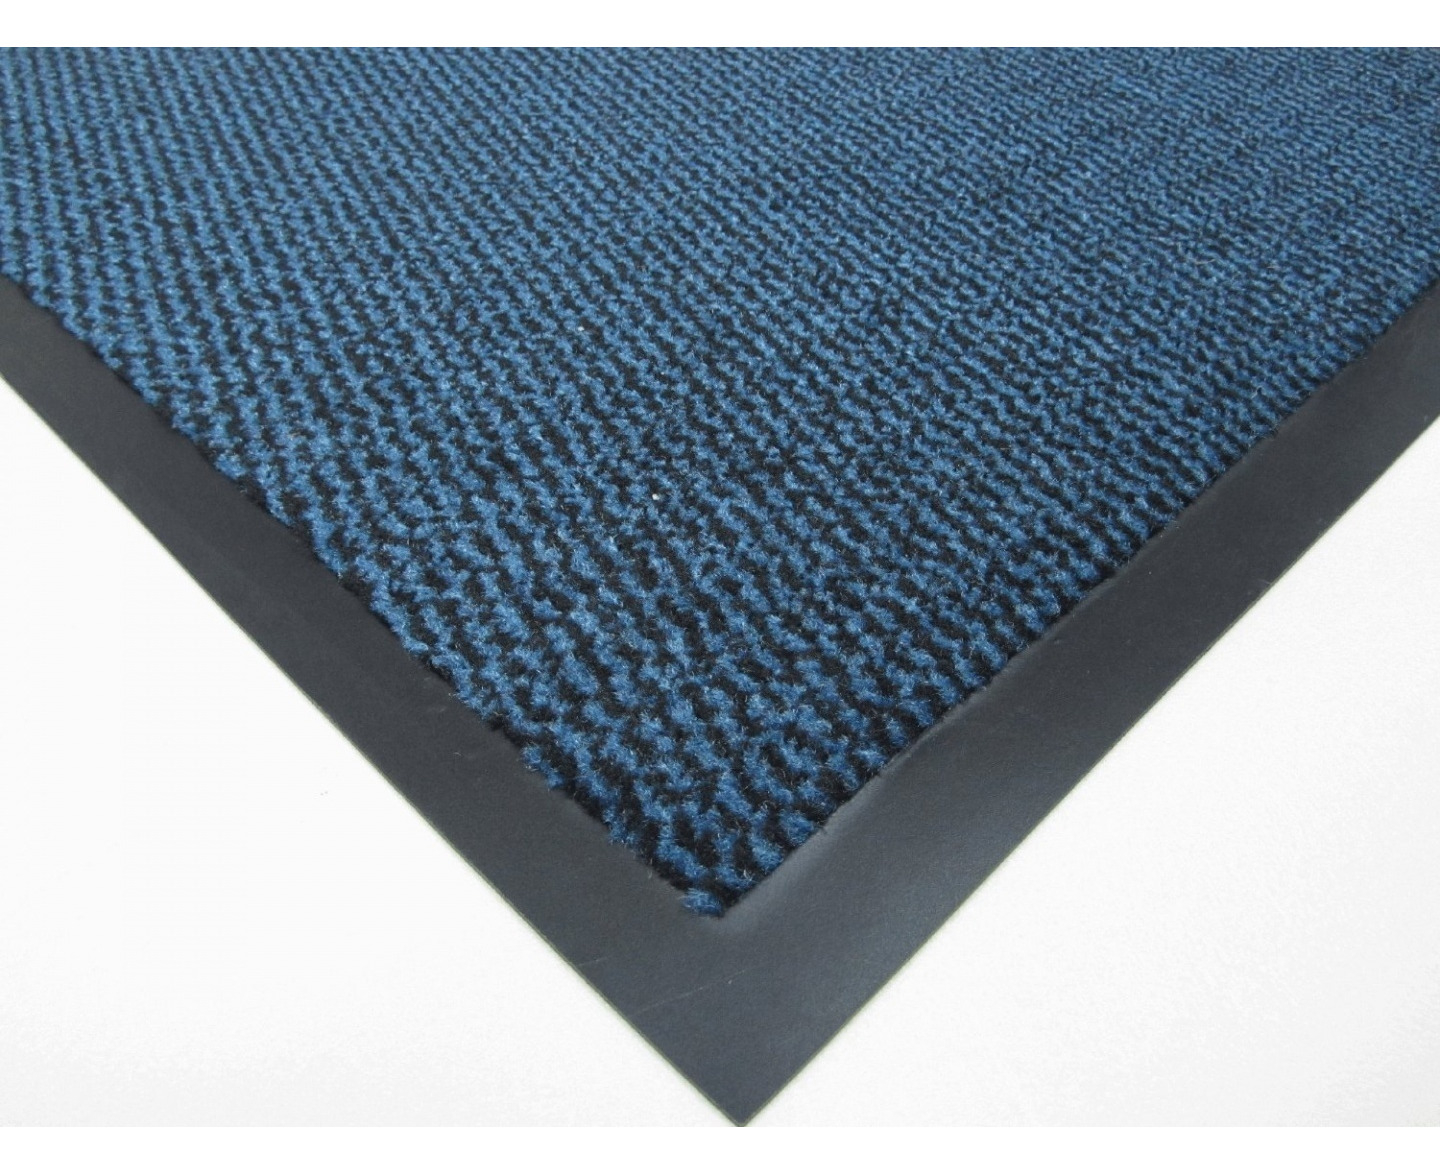 FunkyBuys Large Non Slip Heavy Duty Large Entrance Barrier Washable Mat Rugs Indoor/Outdoor Runner Blue Black 60 cm x 180 cm 